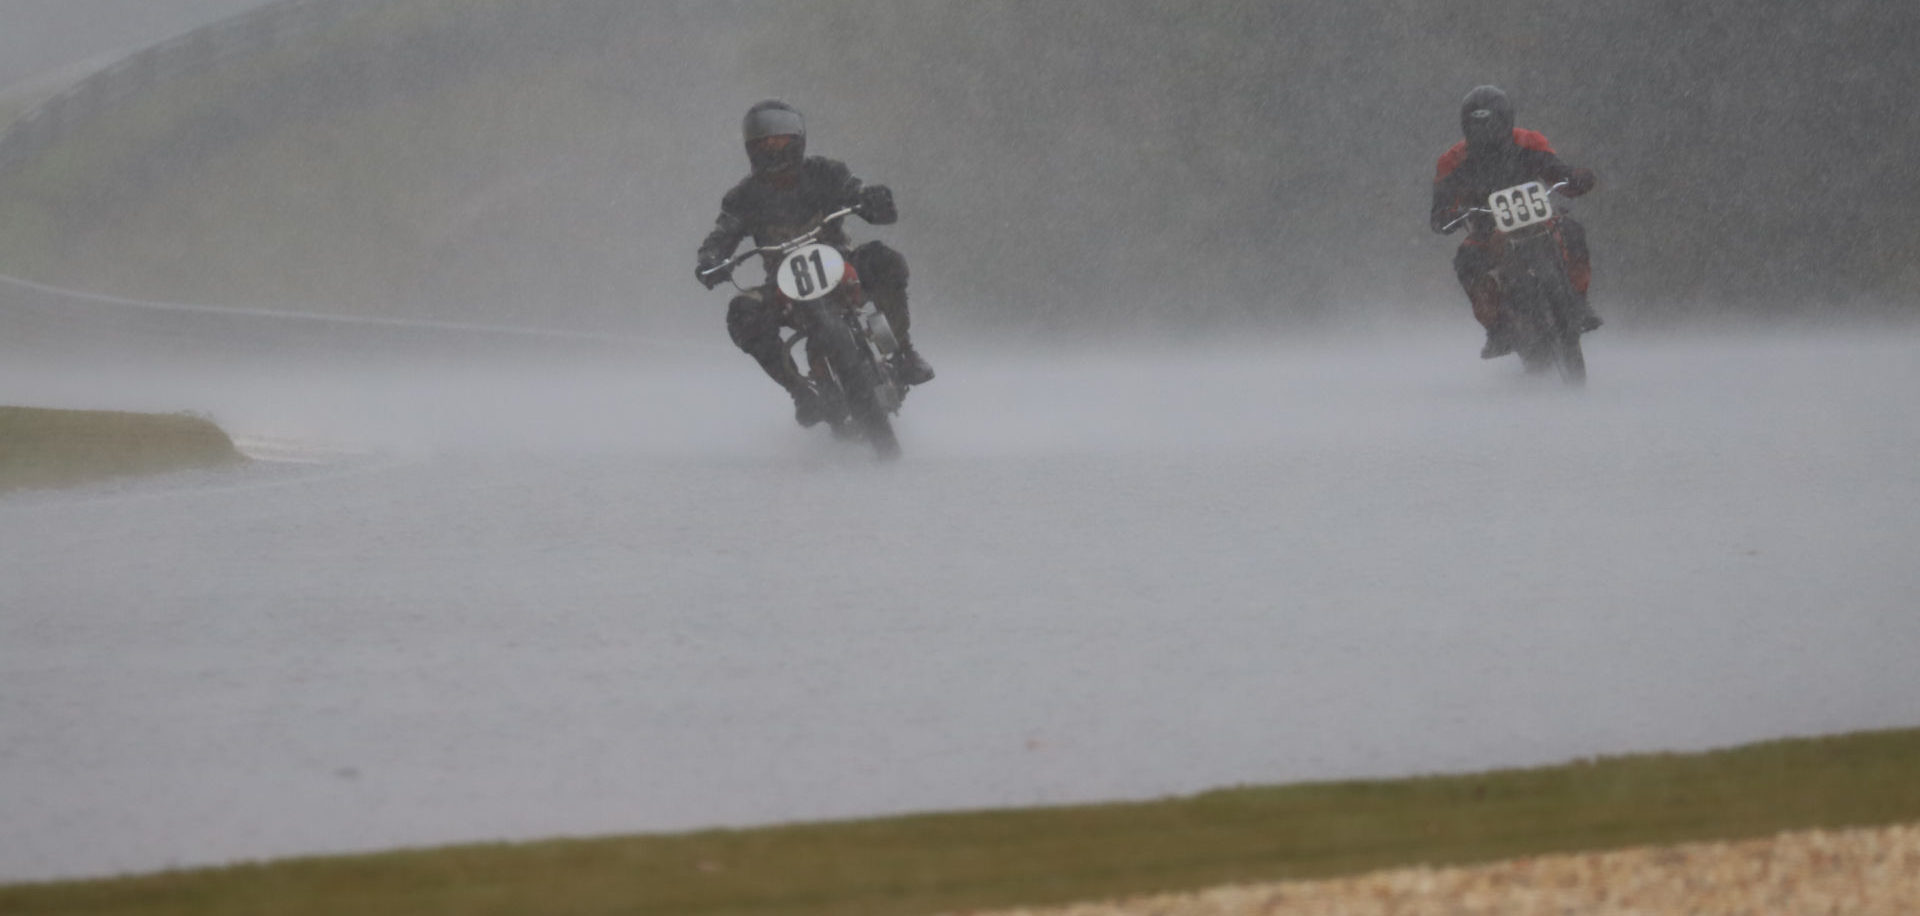 AHRMA Handshift Shootout competitors Ralph Wessell (81) and Tim Droege (335) race in the pouring rain at Barber Motorsports Park. Photo by etechphoto.com, courtesy AHRMA.